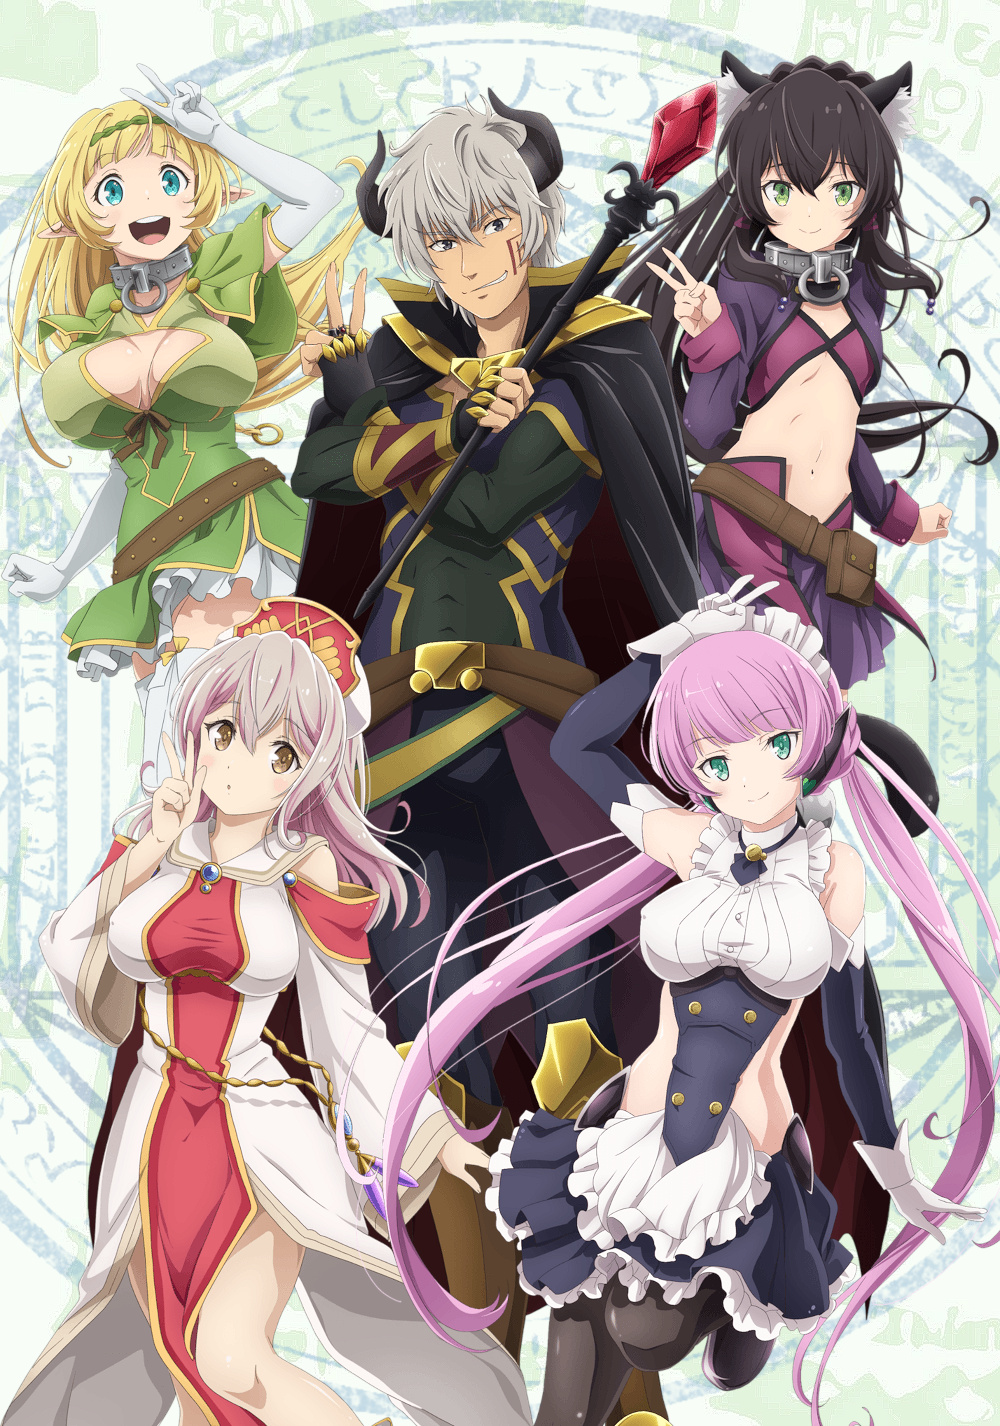 How Not To Summon A Demon Lord Takuma Sakamoto with 4 girls standing next to him